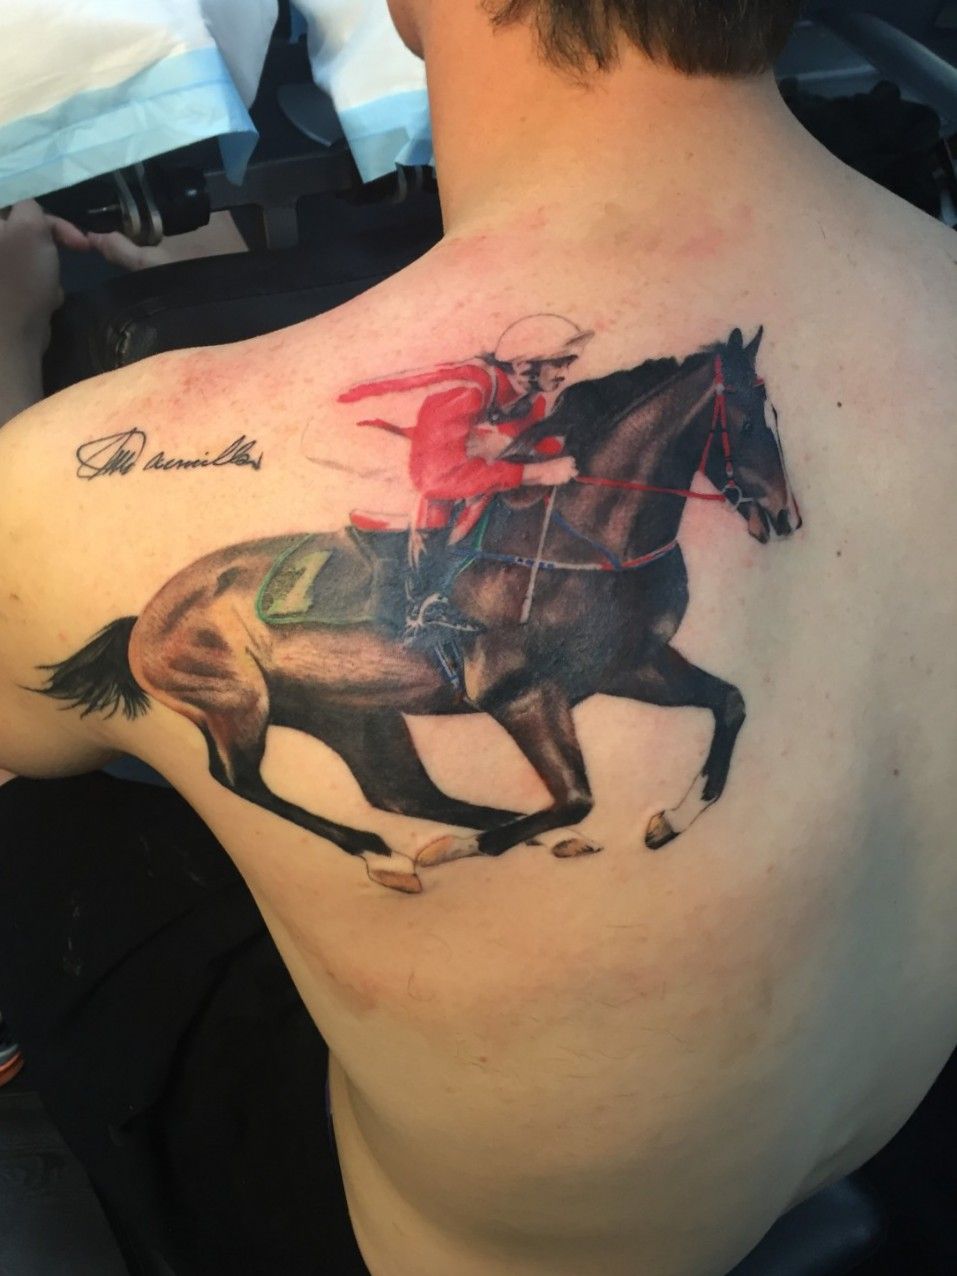 Horse  Jockey Made of Puzzle Pieces by Rachel  East River Tattoo in  Brooklyn  Tattoos Horse tattoo Rope tattoo